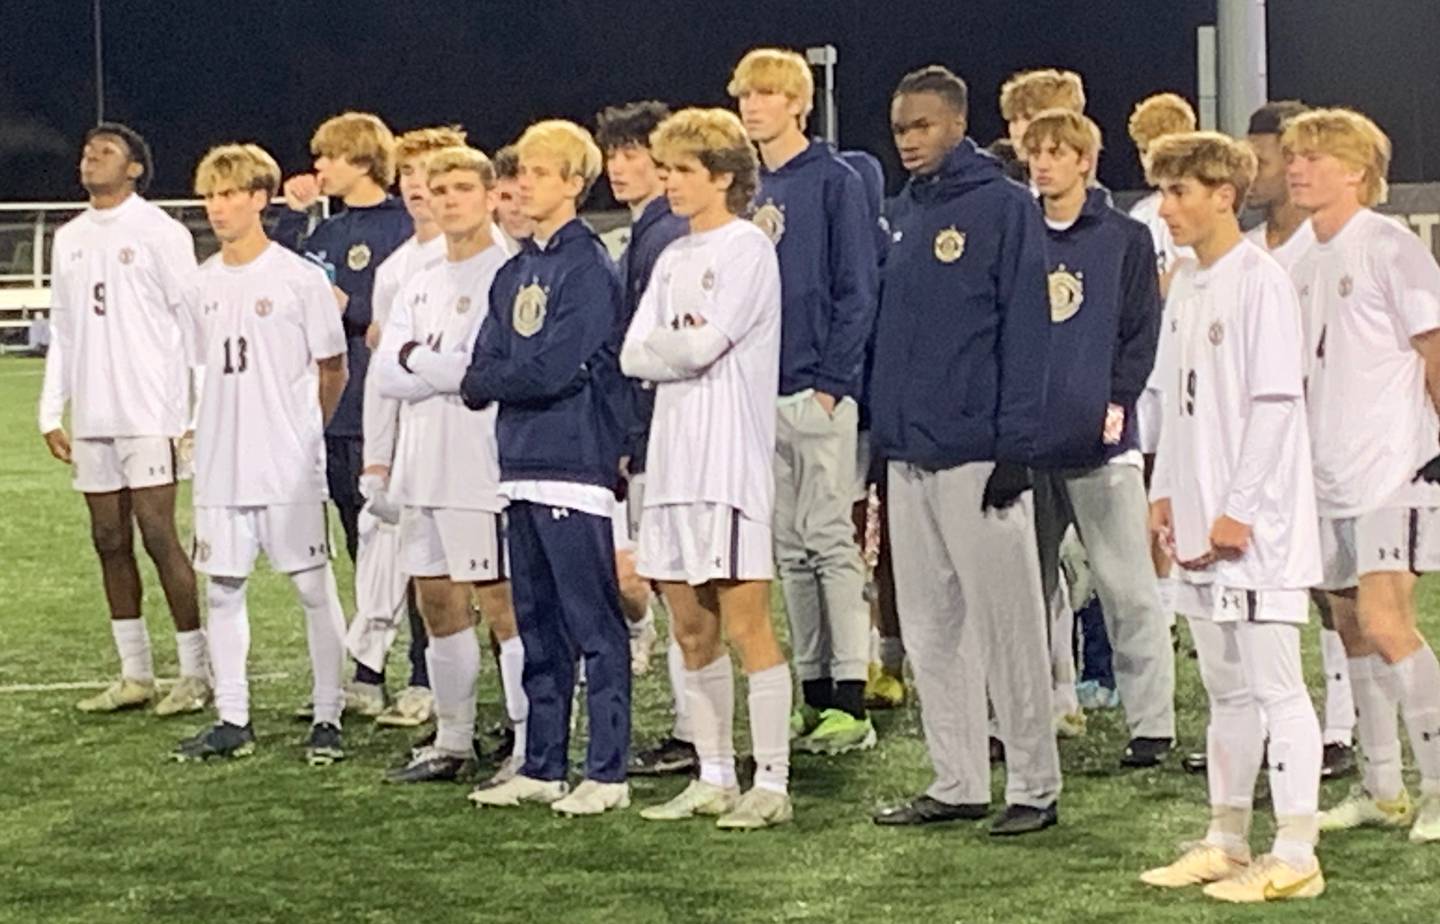 Severna Park boys soccer team watches during Saturday night's Class 4A state championship game awards ceremony. The No. 4 Falcons dropped a 1-0 decision to Prince George's County's Bowie at Loyola University's Ridley Athletic Complex in Northwest Baltimore.